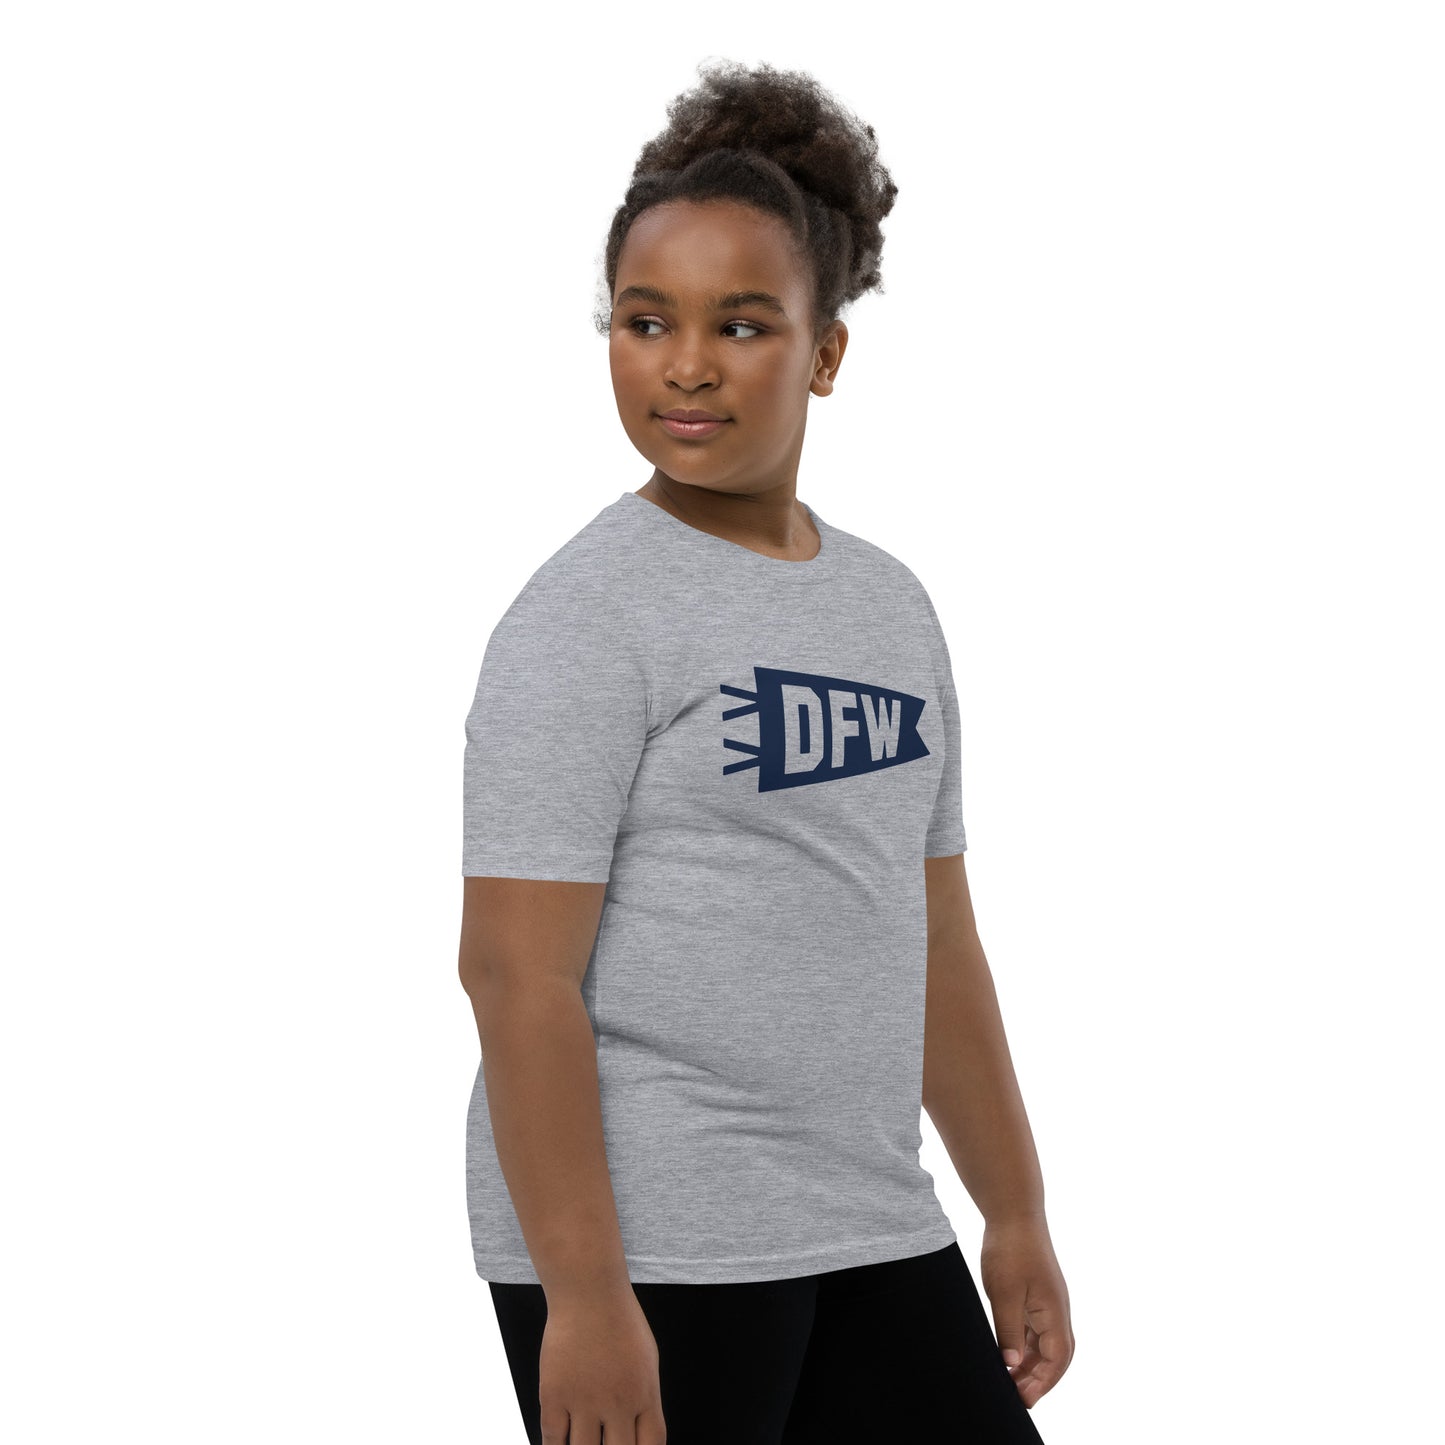 Kid's Airport Code Tee - Navy Blue Graphic • DFW Dallas • YHM Designs - Image 03